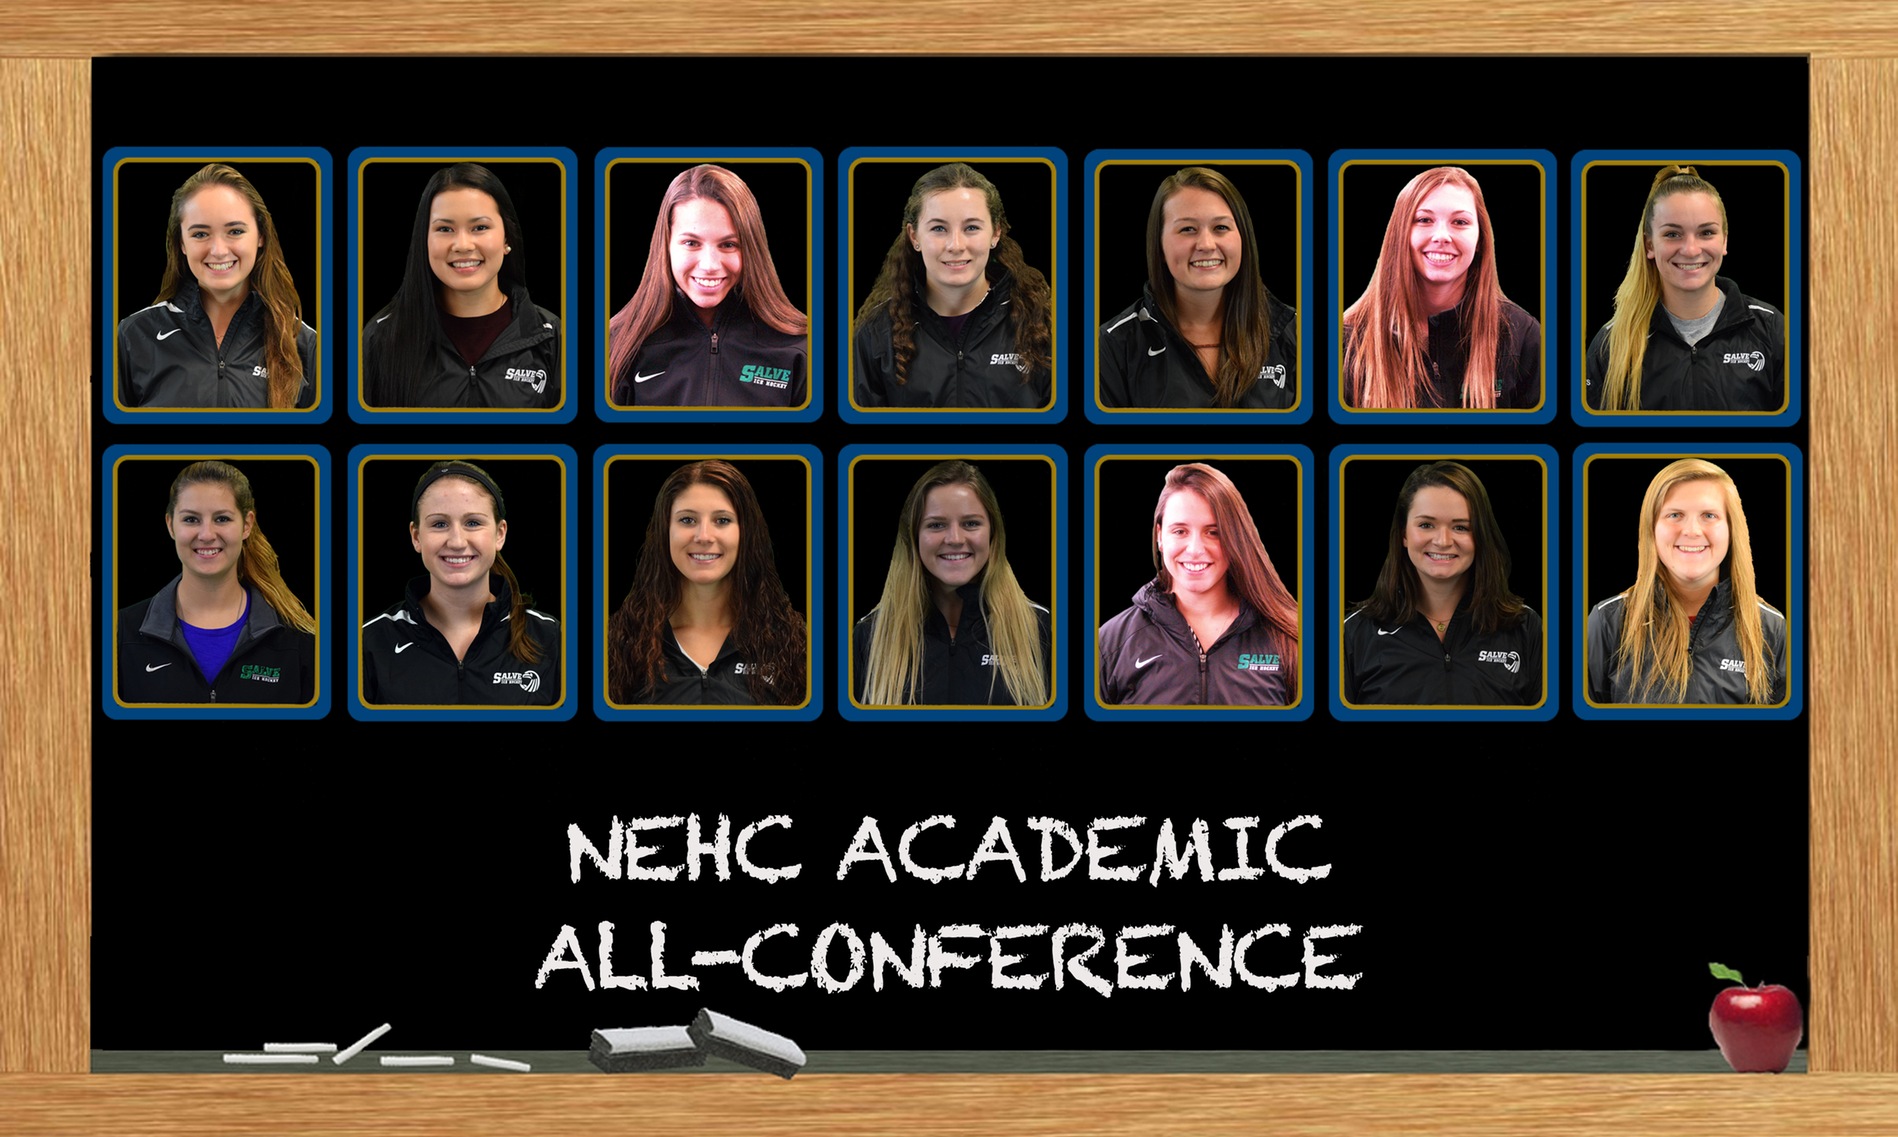 14 members of the Salve Regina women's ice hockey team were named to the NEHC Academic All-Conference team.